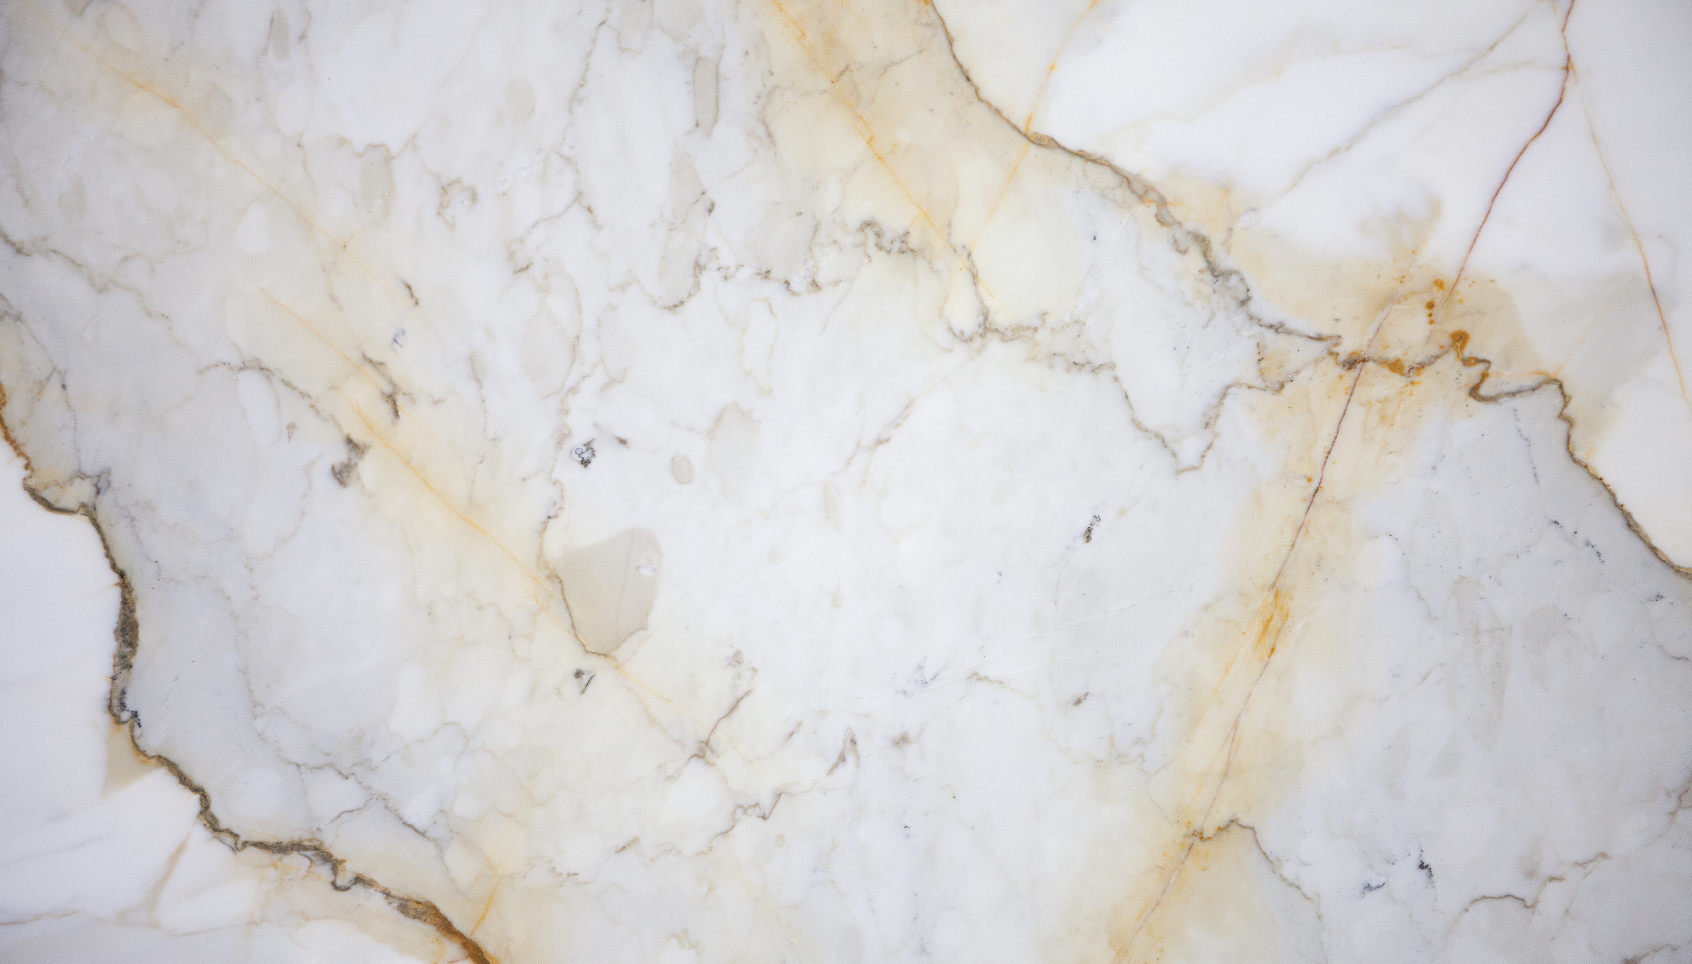 WHY DOES WHITE MARBLE TURN YELLOW?